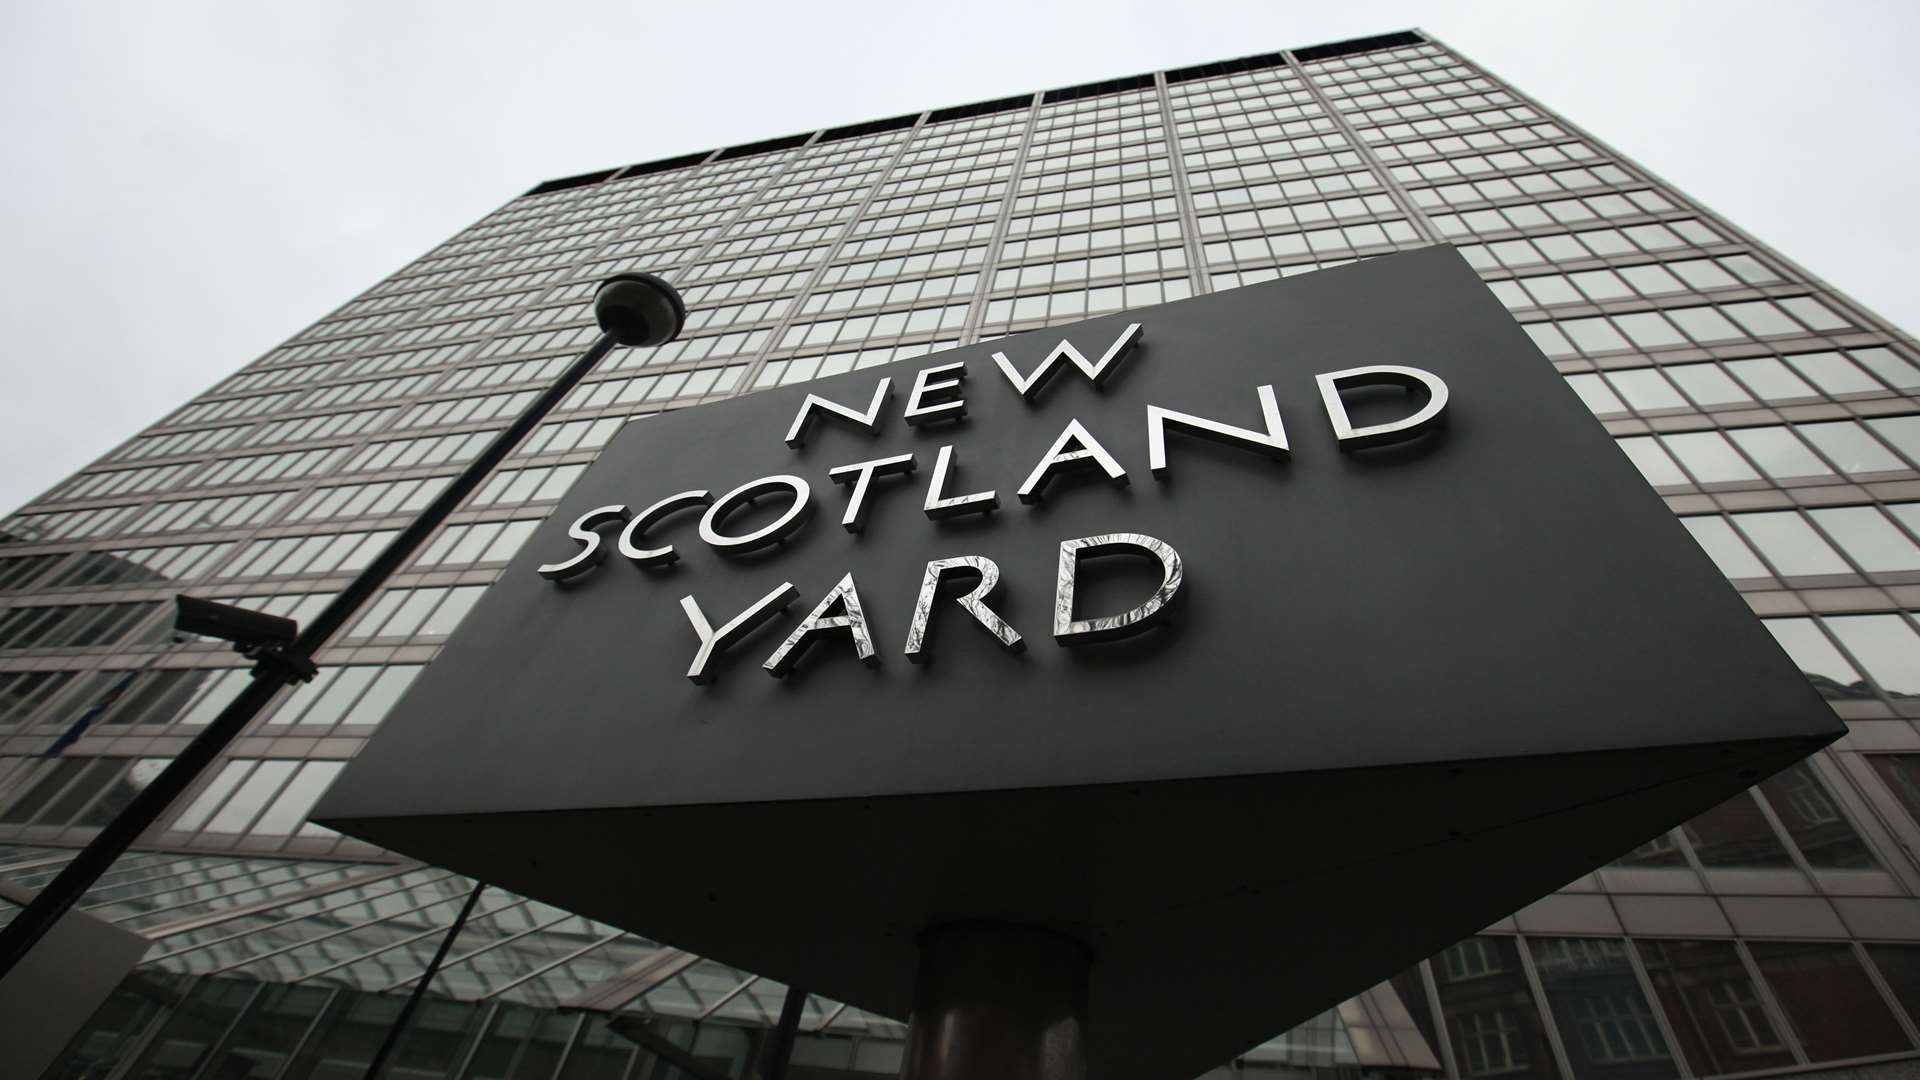 The arrest was made by officers from Scotland Yard